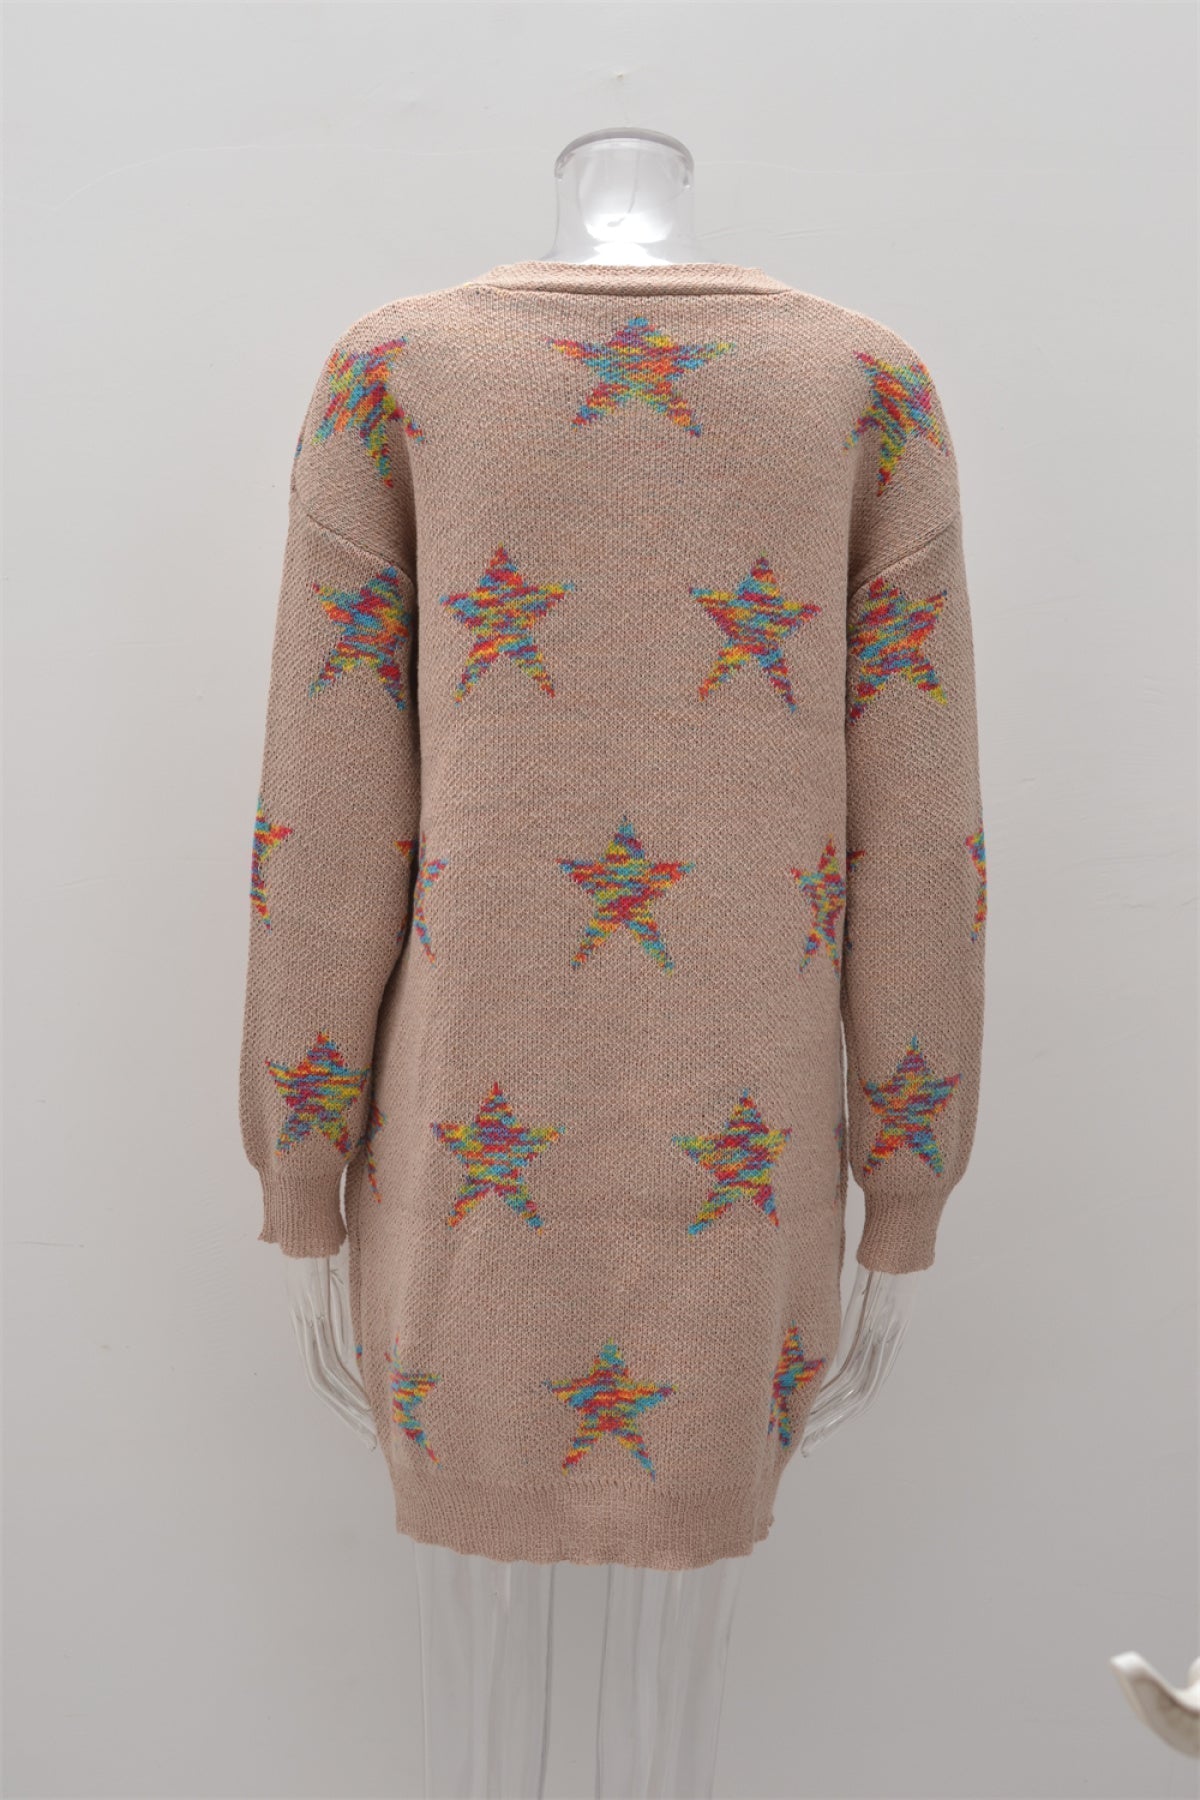 Star Graphics Knit Sweater Cardigan With Pockets